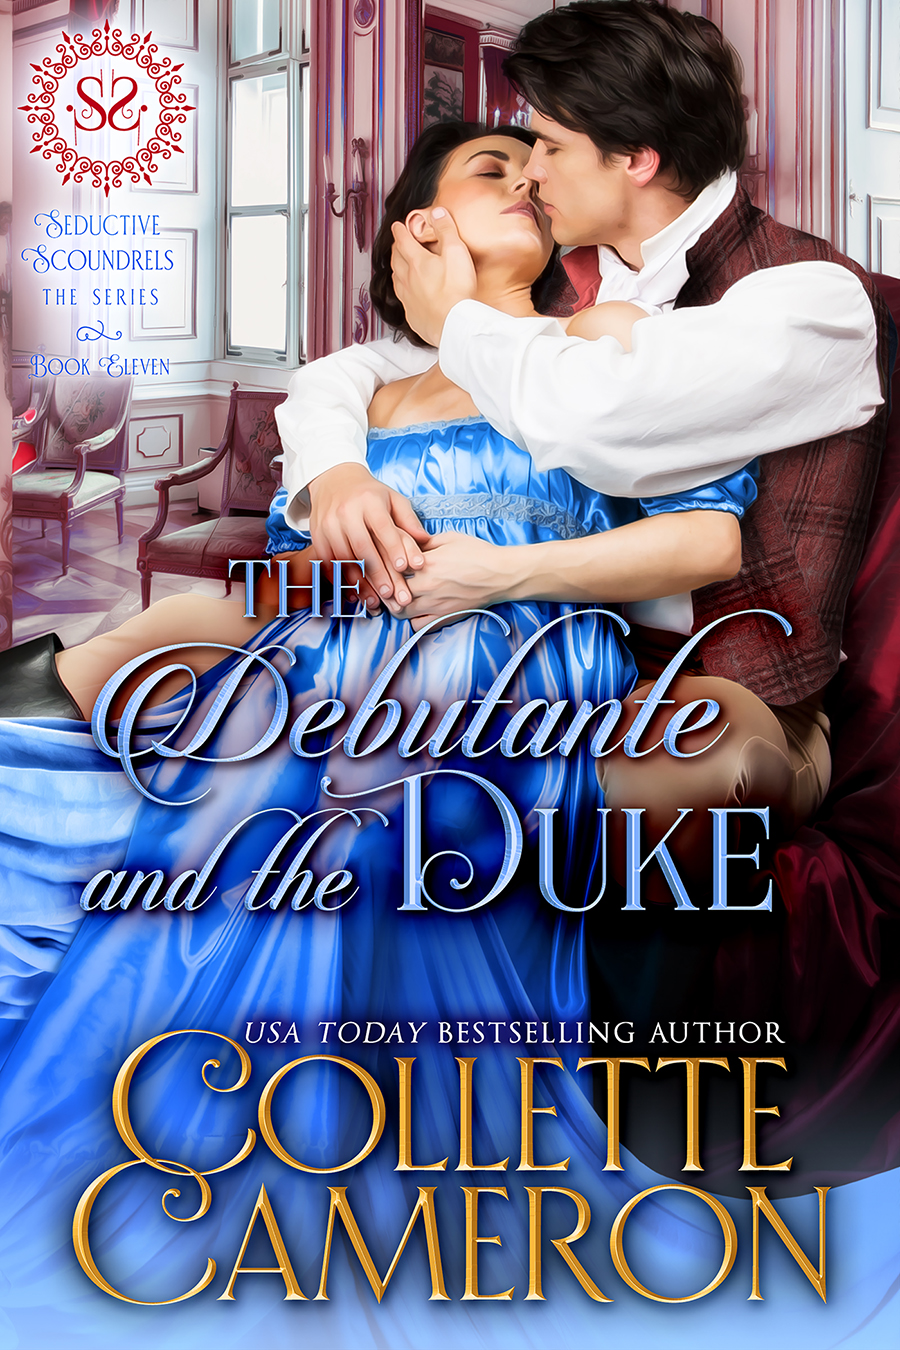 Seductive Scoundrels Special: a FREE book and a 99¢ sale!